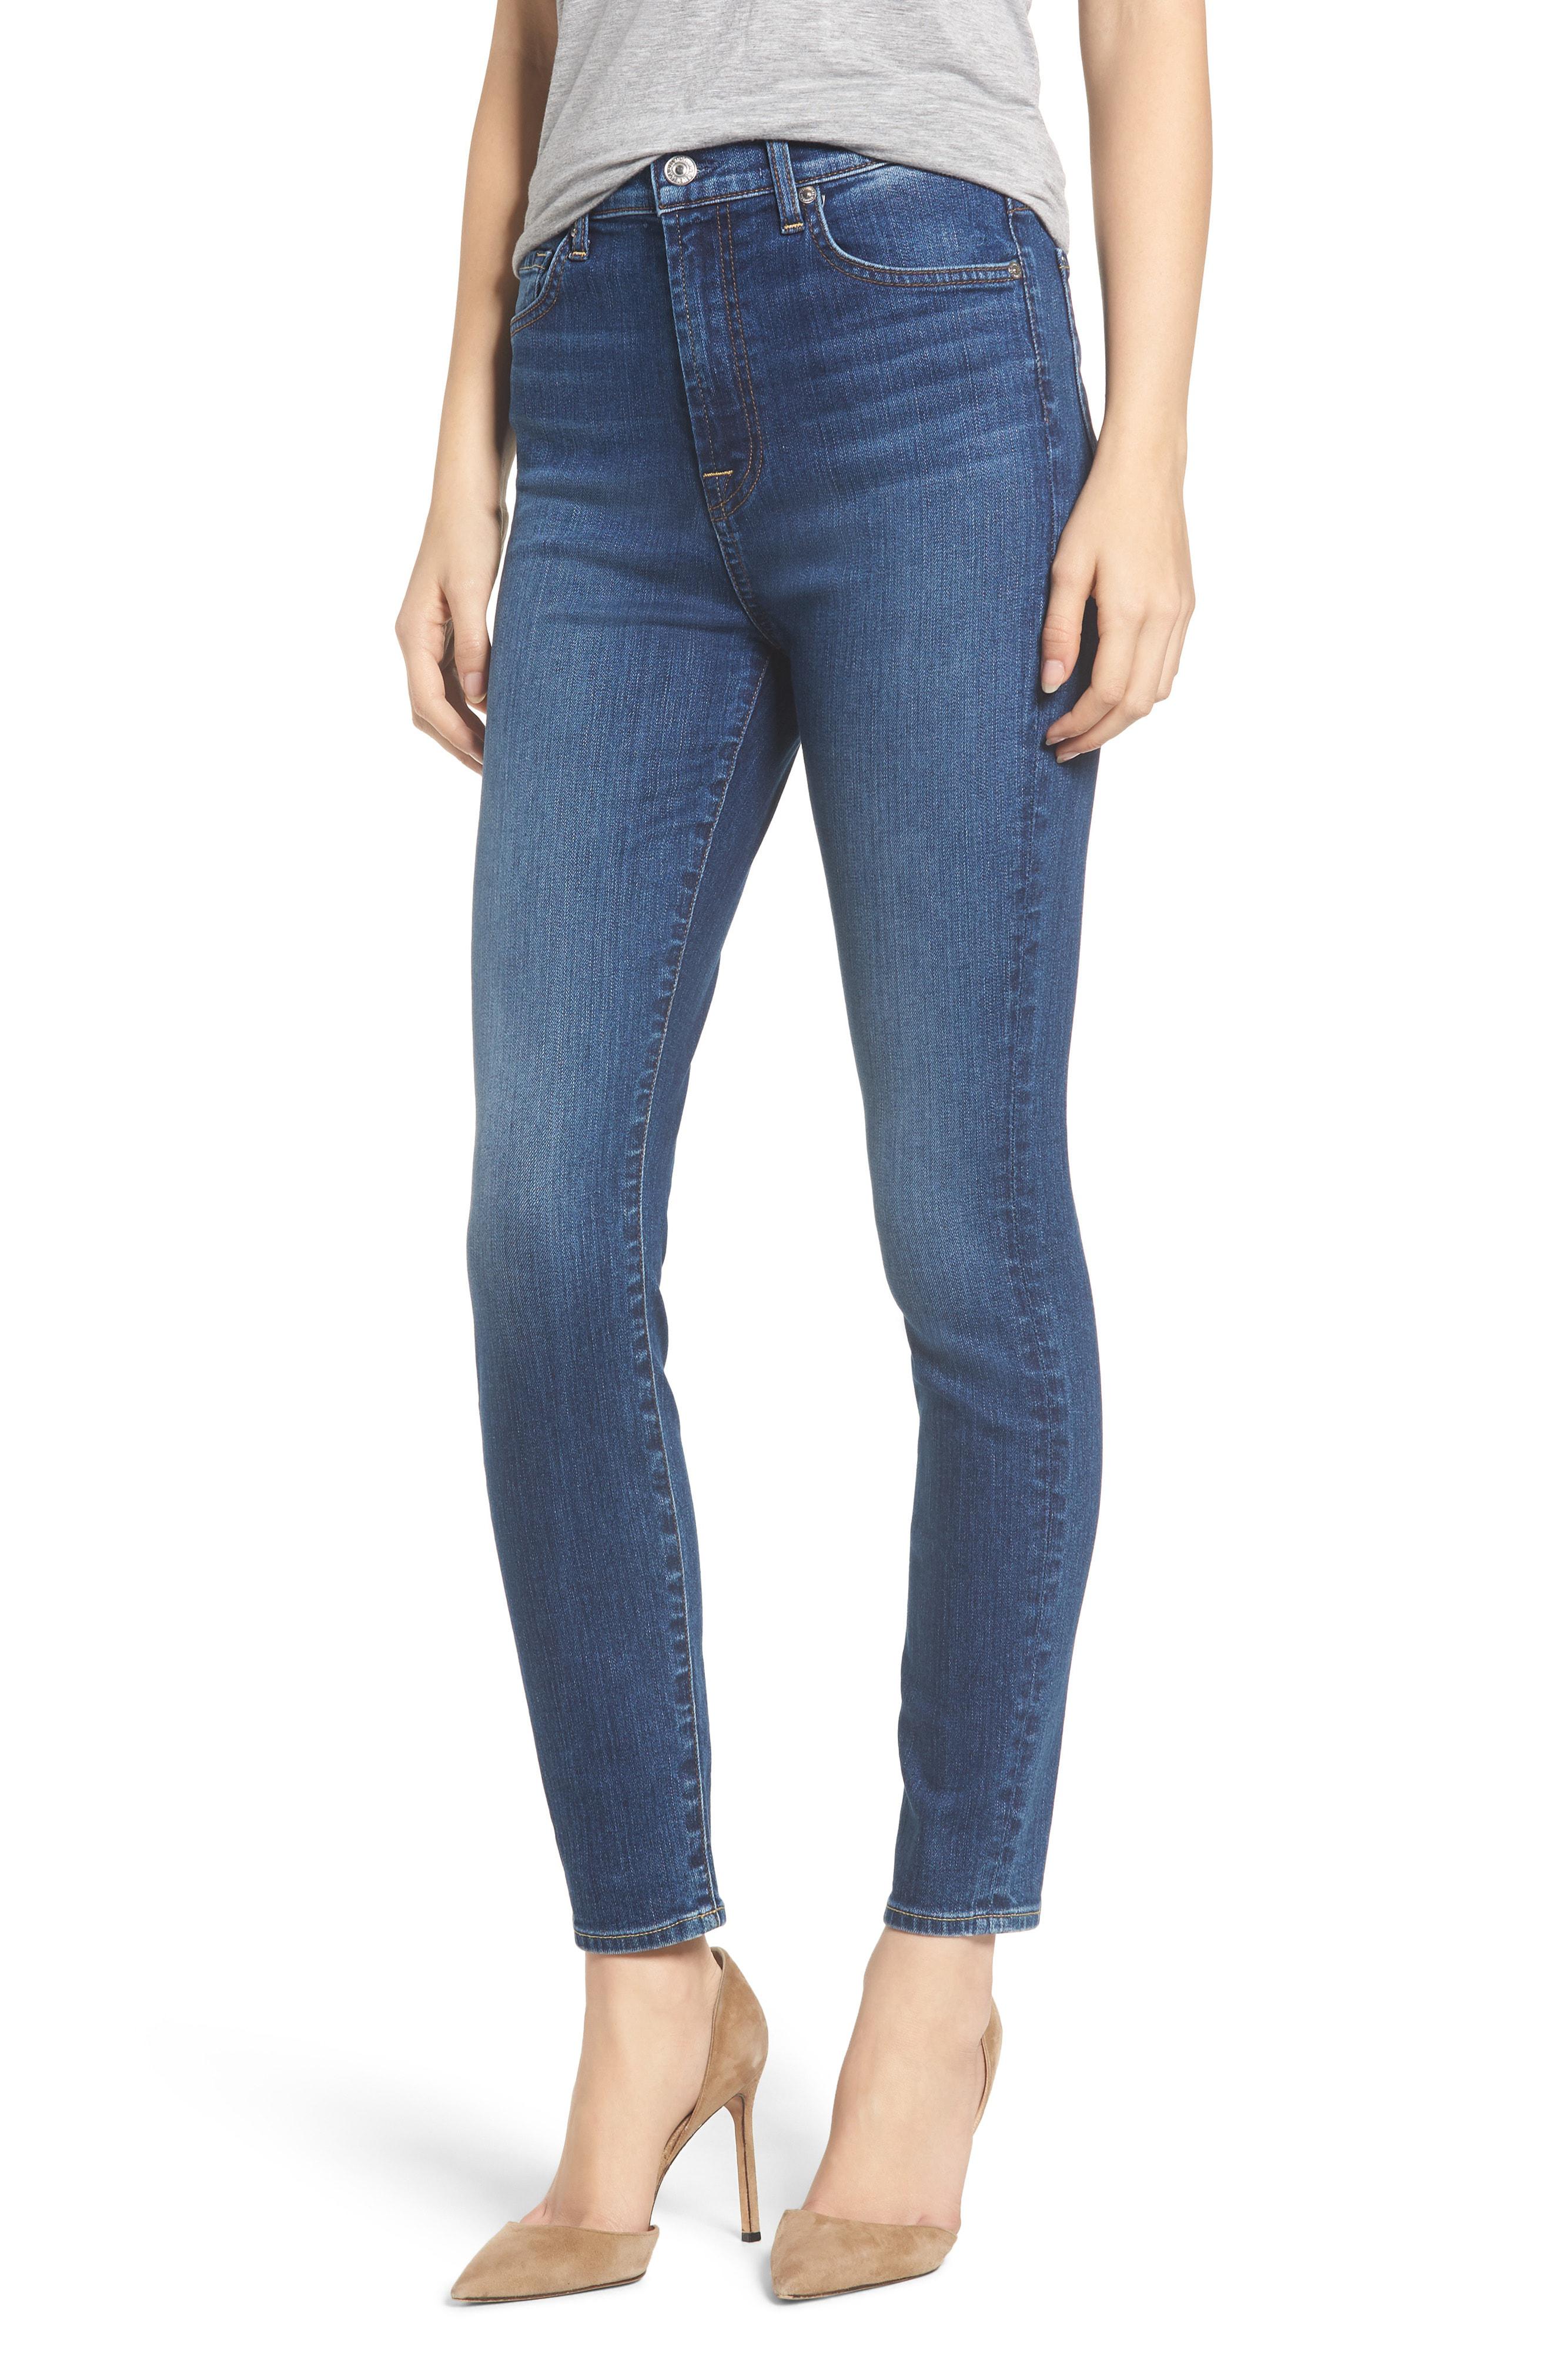 Lyst - 7 For All Mankind 7 For All Mankind Aubrey High Waist Ankle ...